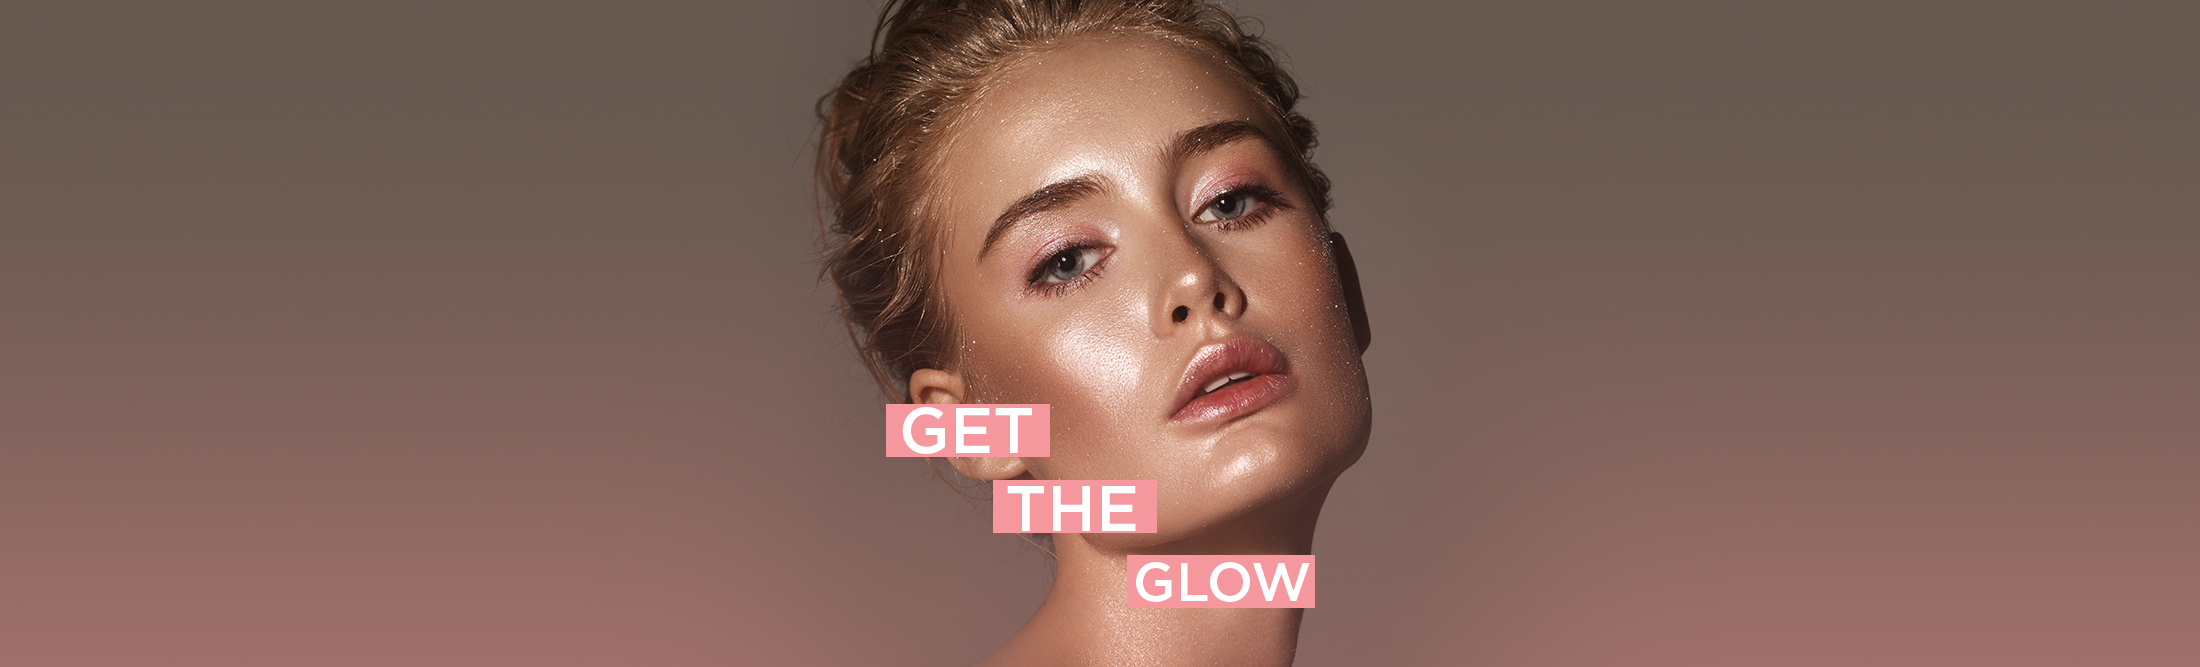 Get The Glow  |  How to Get Glowing Skin